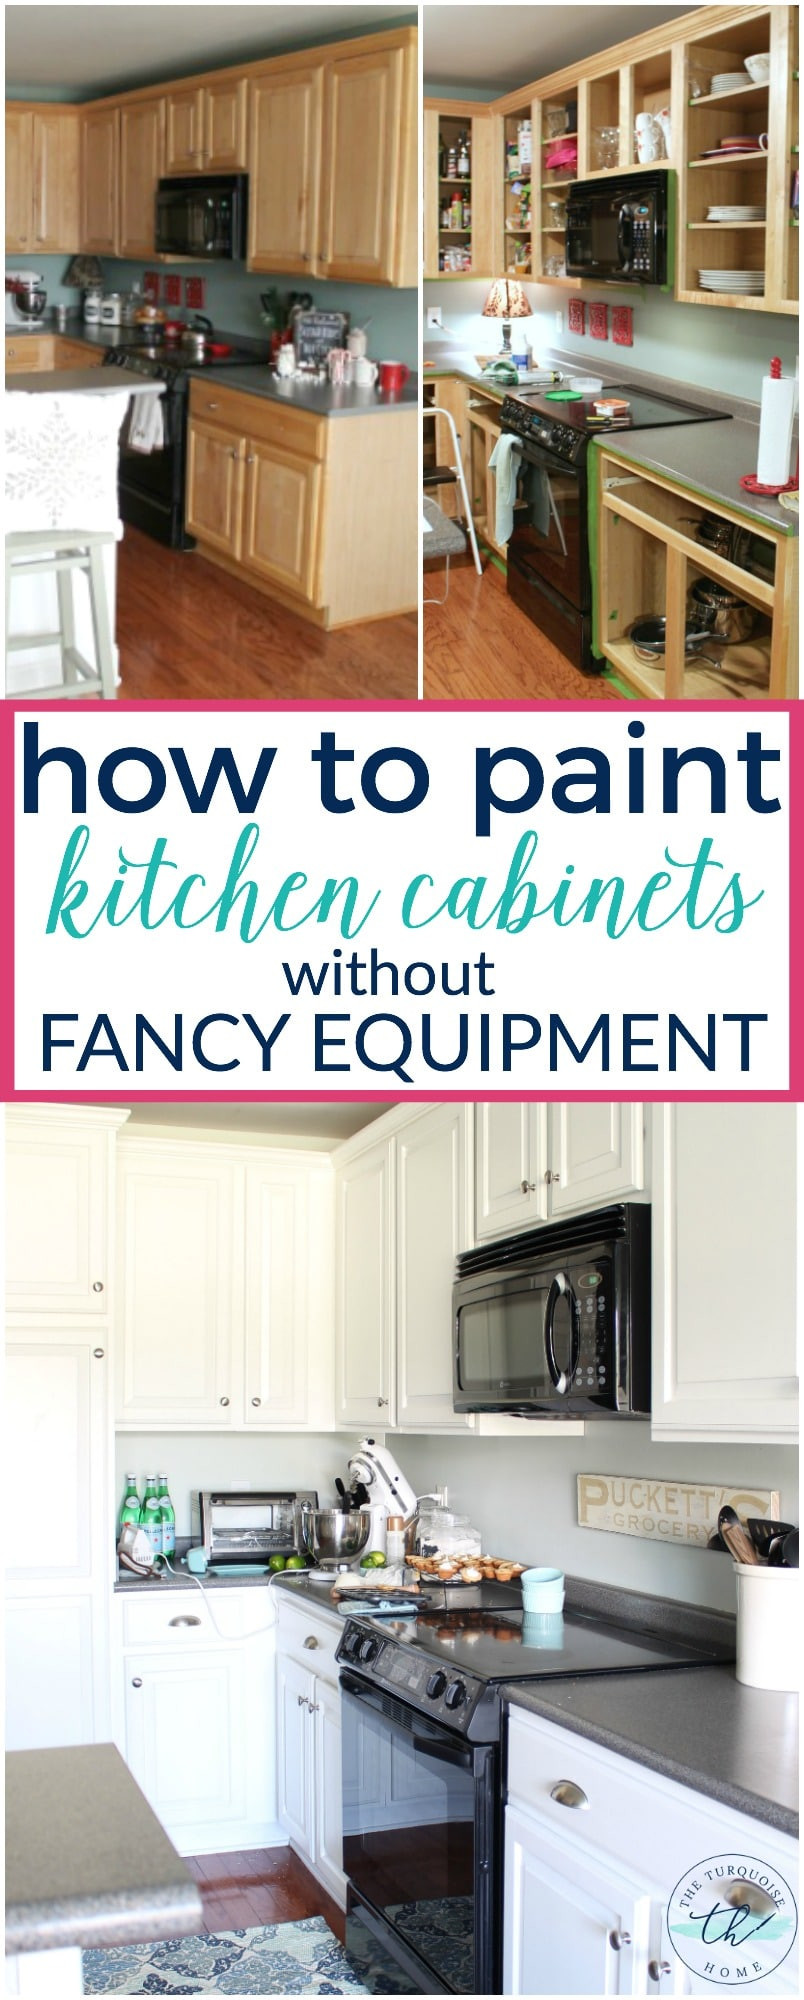 Paint Kitchen Cabinets Without Sanding
 How to Paint Kitchen Cabinets without Fancy Equipment